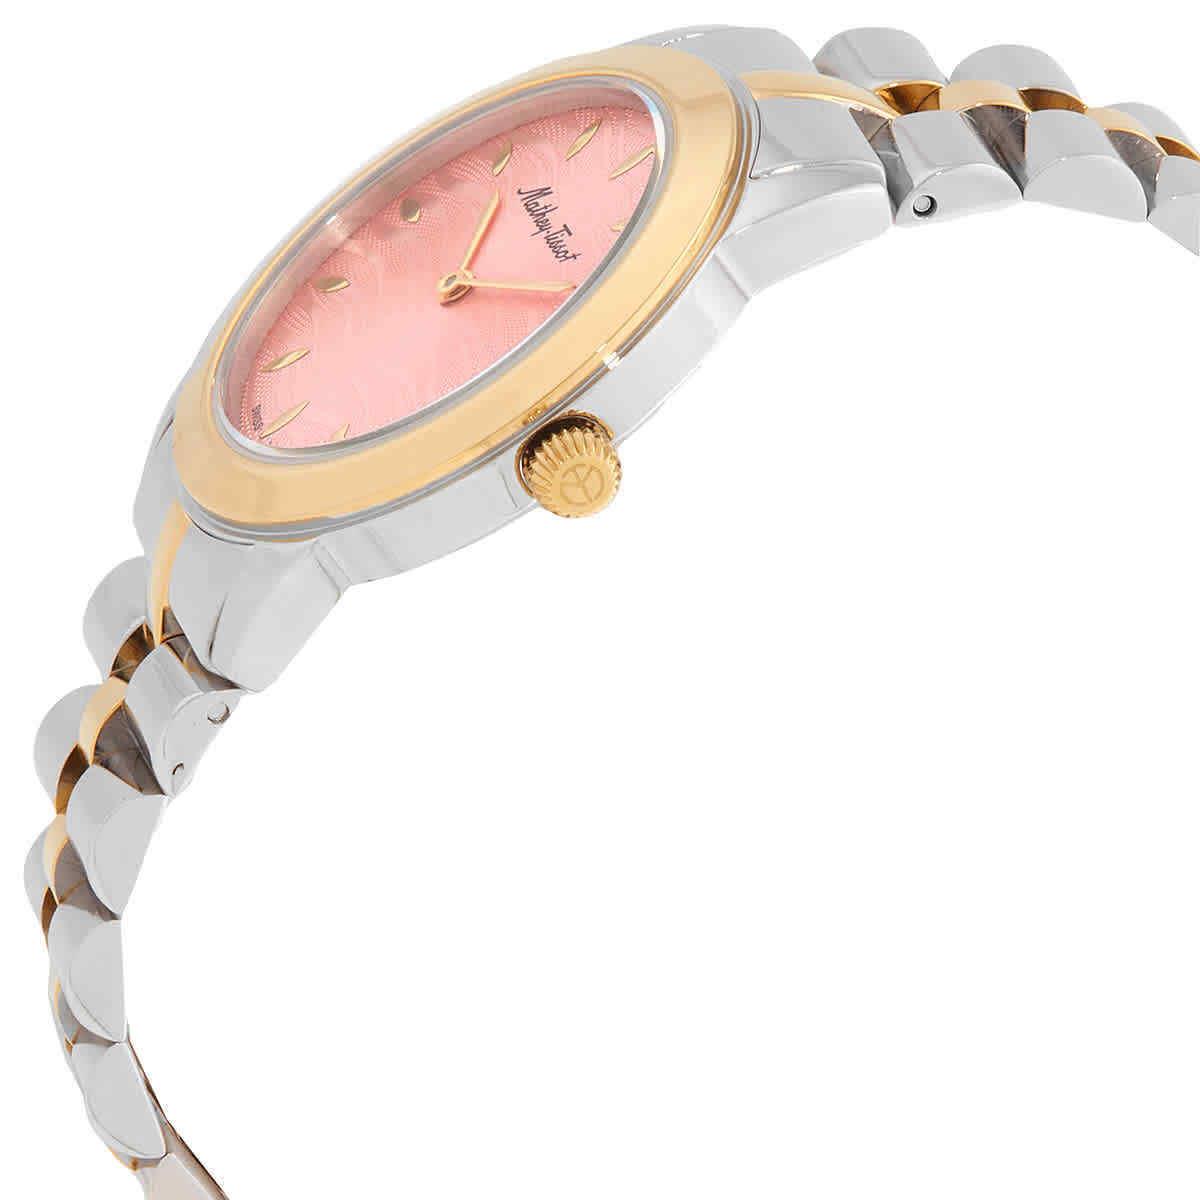 Mathey-tissot Artemis Quartz Pink Dial Ladies Watch D10860BYPK - Dial: Pink, Band: Two-tone (Silver-tone and Yellow Gold PVD), Bezel: Silver-tone